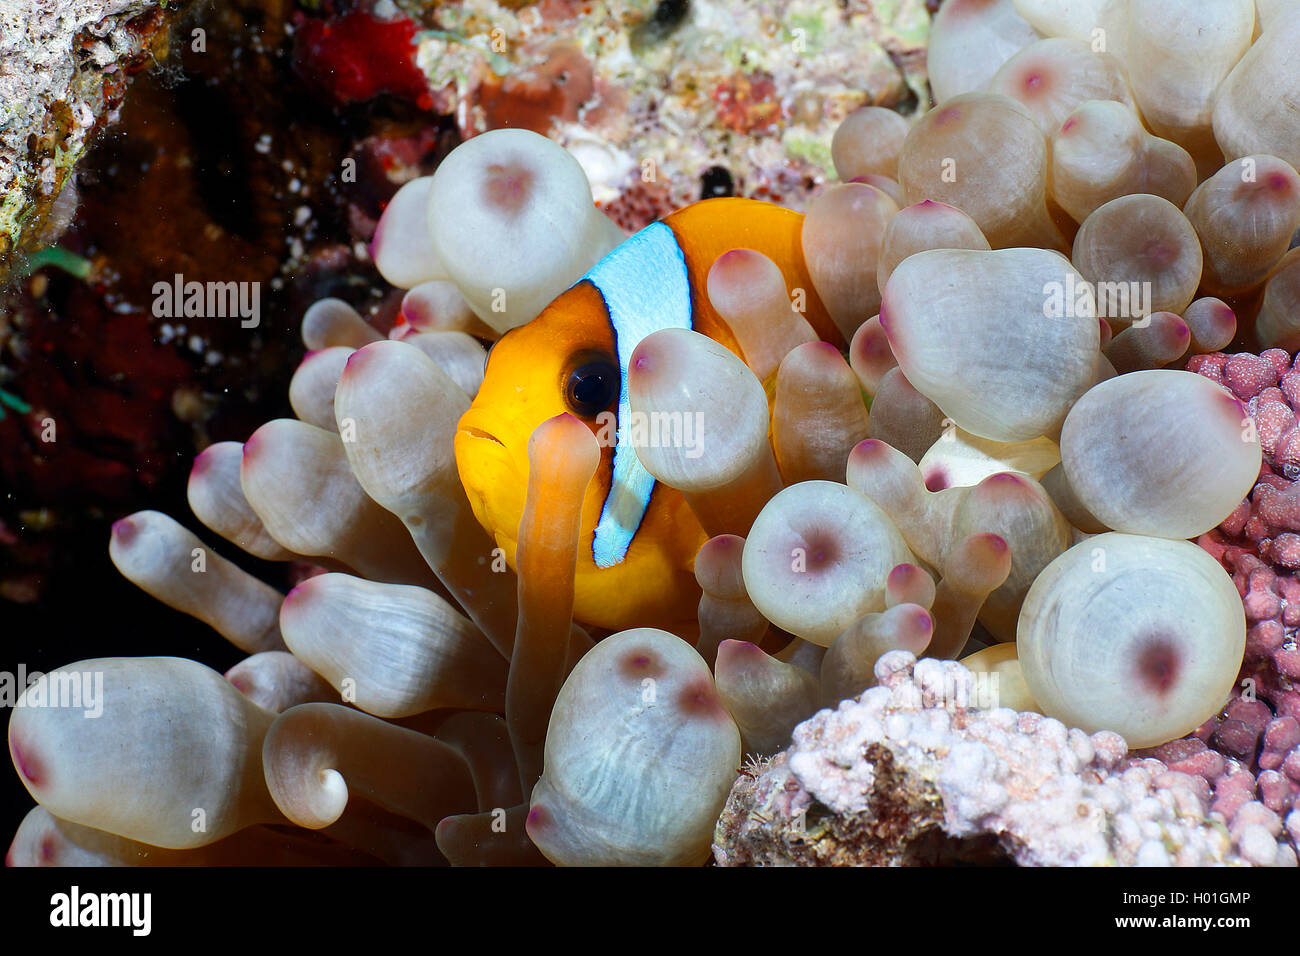 two-banded anemonefish, twoband anemonefish, red-sea anemonefish, Twobar anemone fish (Amphiprion bicinctus), within sea anemone, Egypt, Red Sea Stock Photo